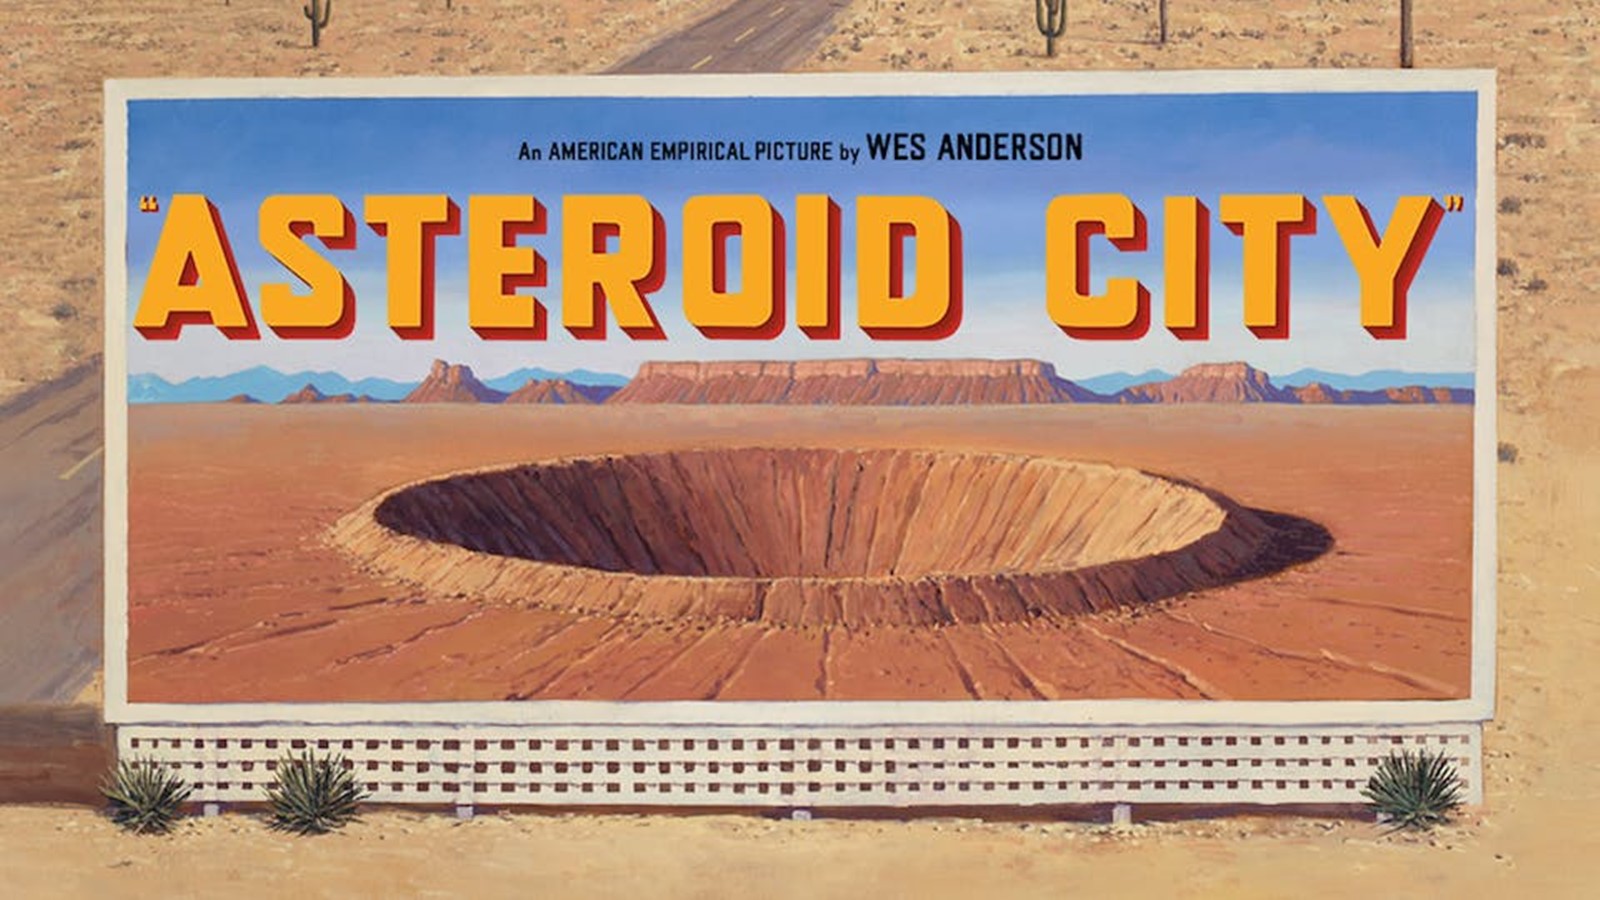 Asteroid City: Wes Anderson's film will premiere at Cannes 2023